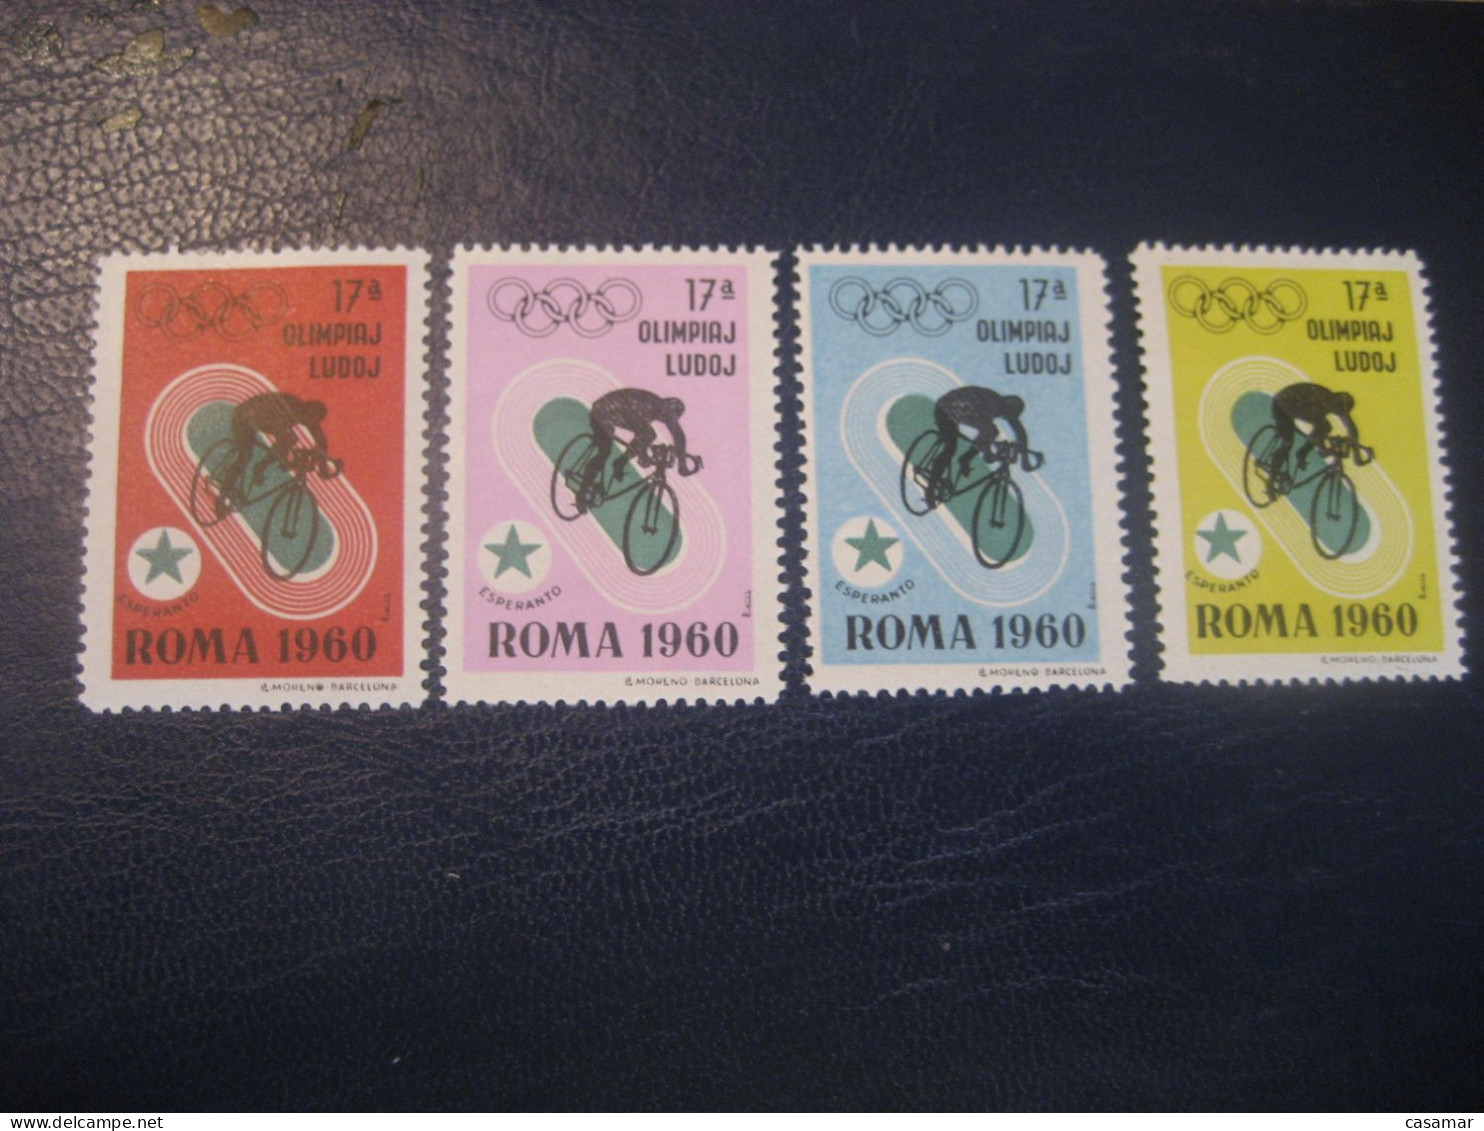 ROMA 1960 Cycling Cyclisme Olympic Games Olympics Esperanto 4 Poster Stamp Vignette ITALY Spain Label - Cyclisme